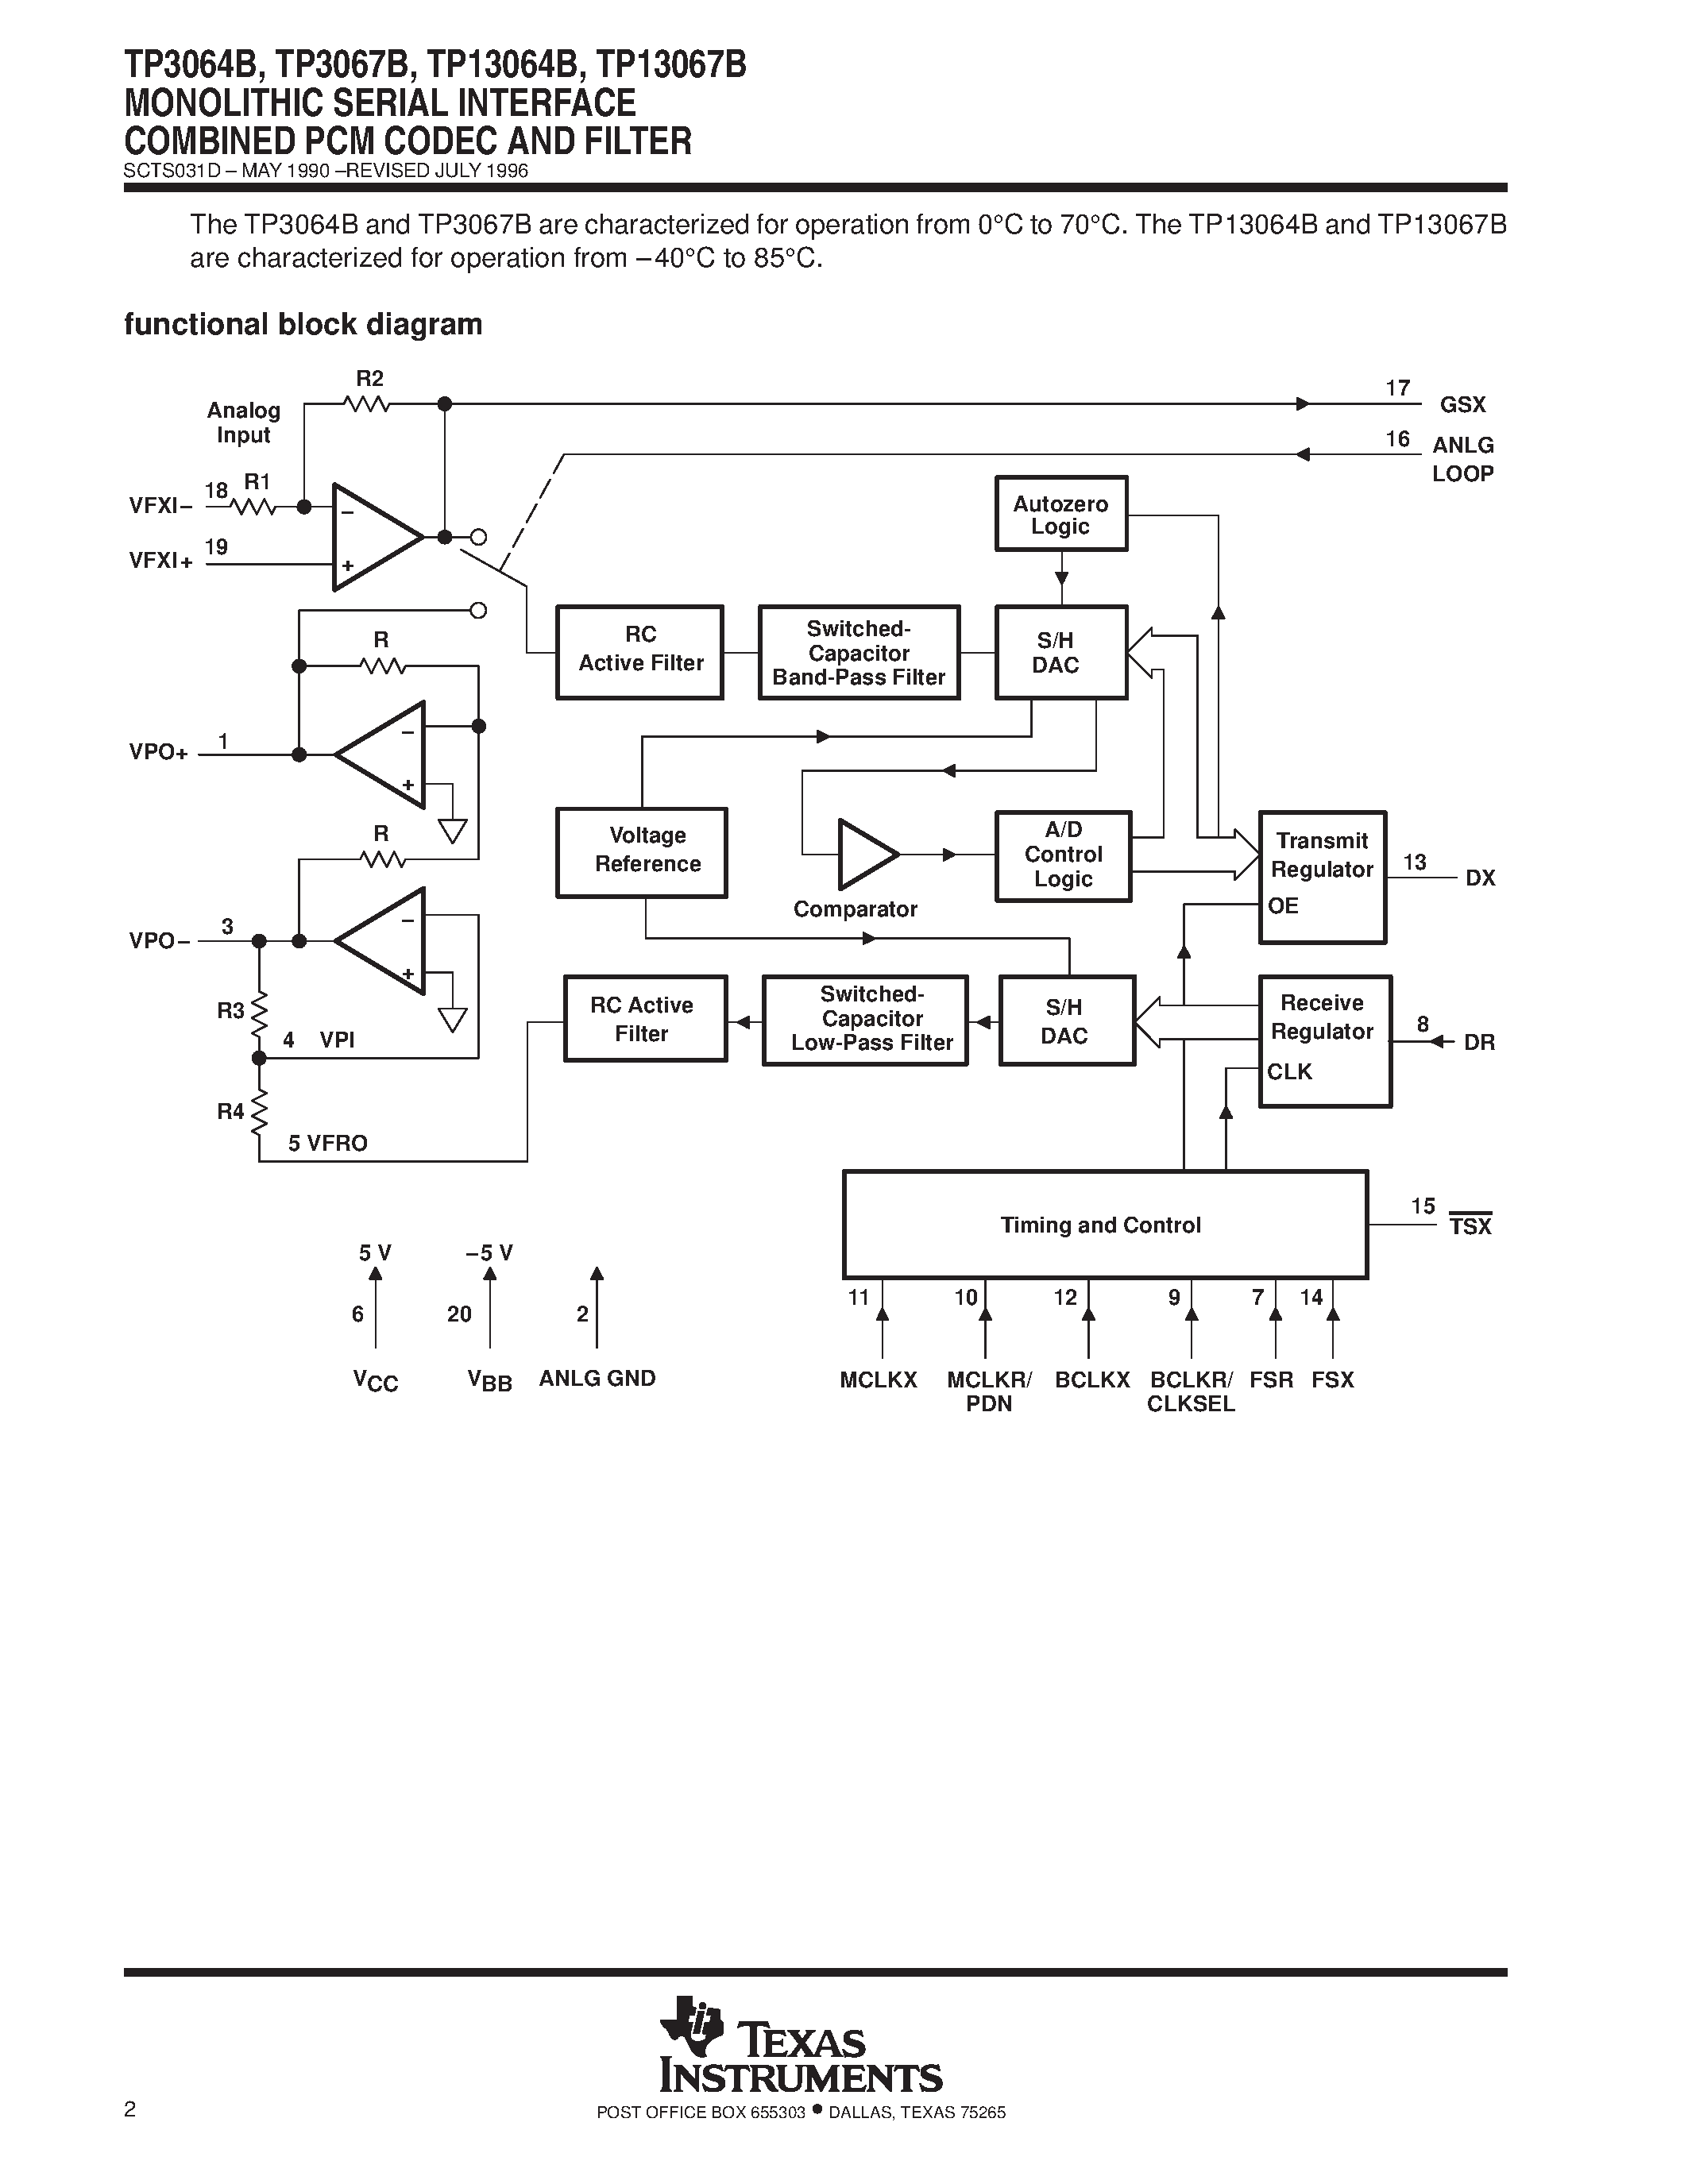 Datasheet TP13067BN - MONOLITHIC SERIAL INTERFACE COMBINED PCM CODEC AND FILTER page 2